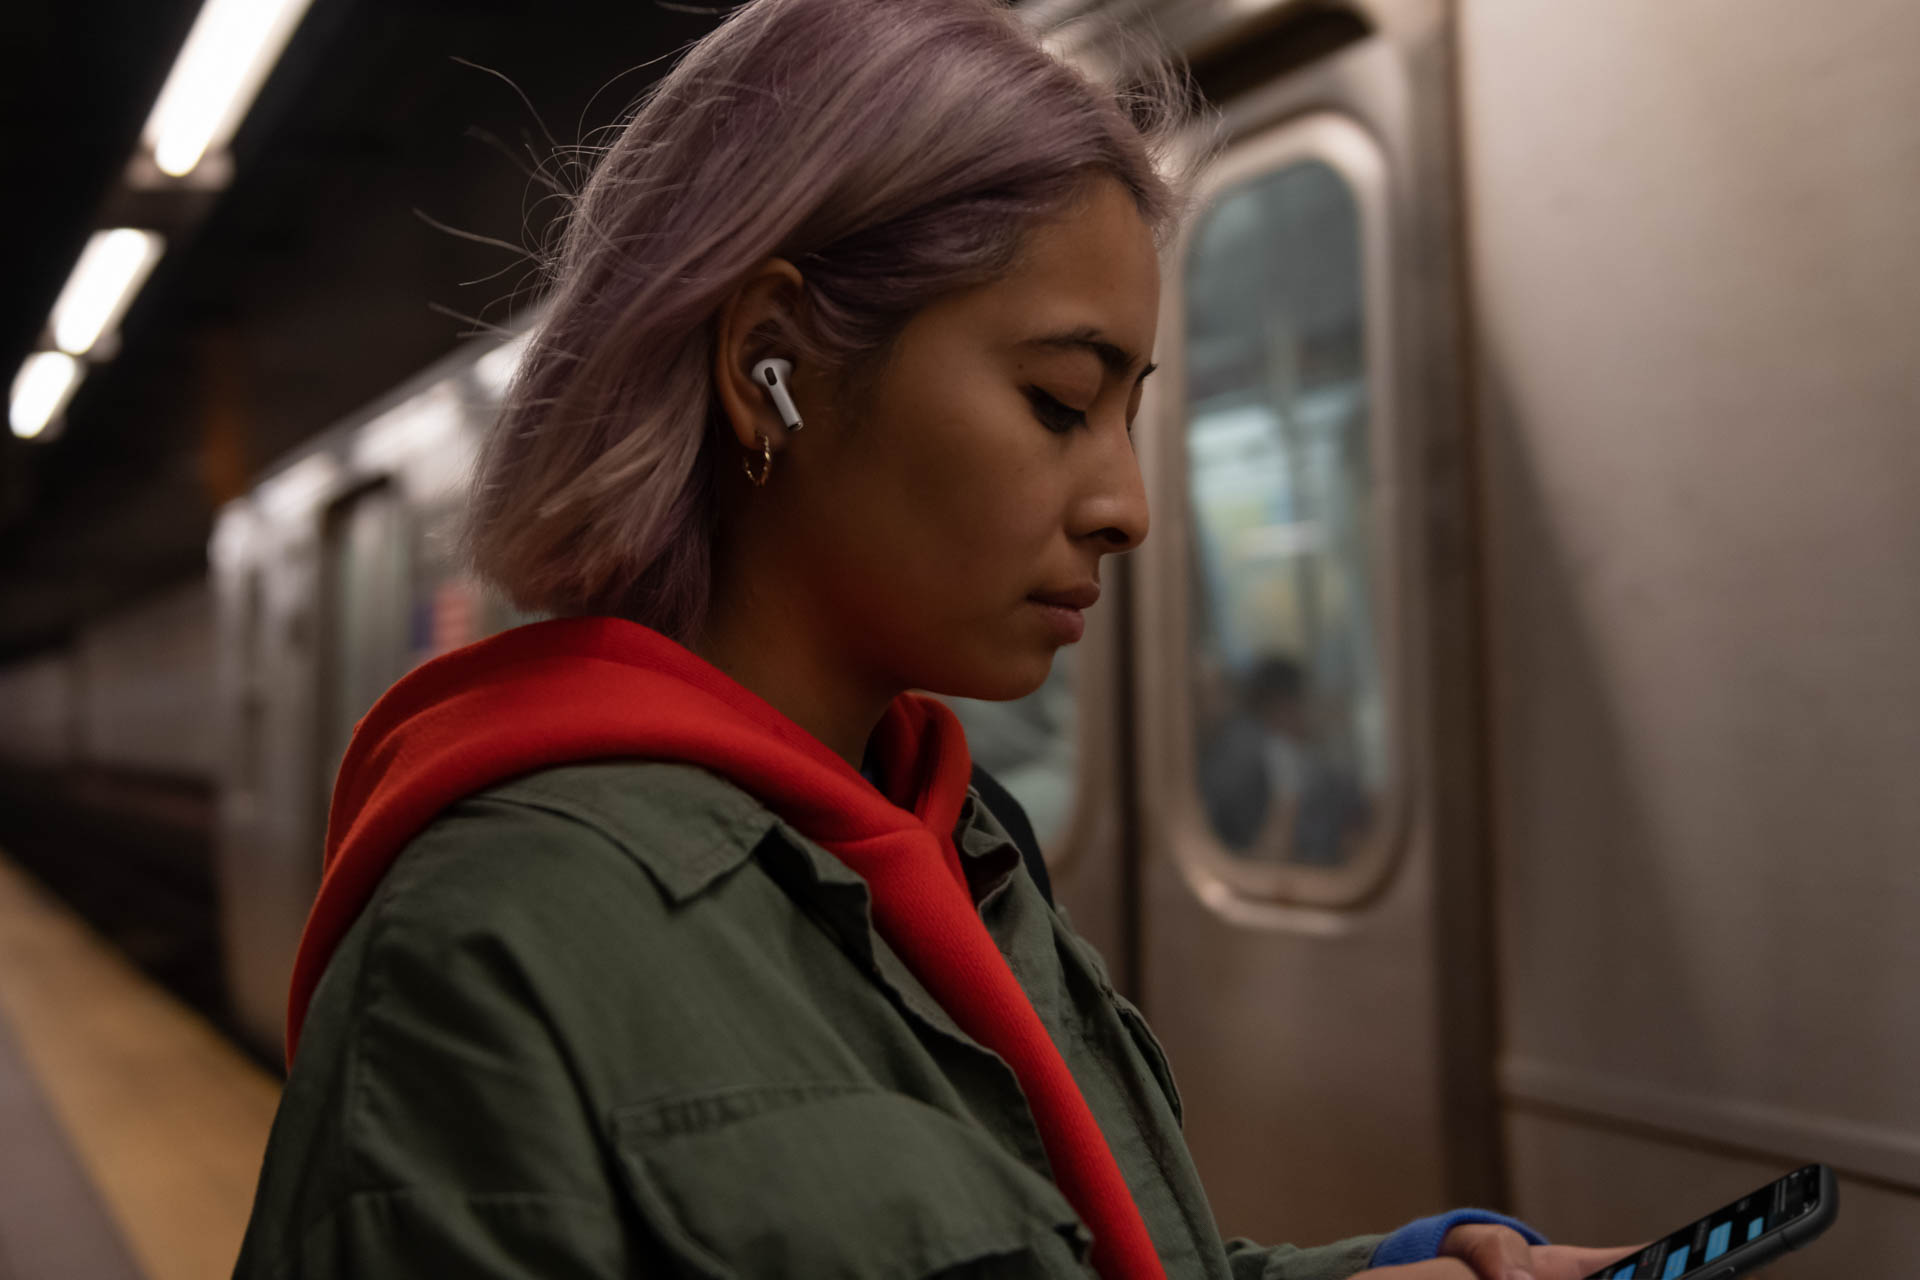 Apple AirPods Pro feature two main operating modes, Active Noise Cancellation and Transparency. Image: Apple.